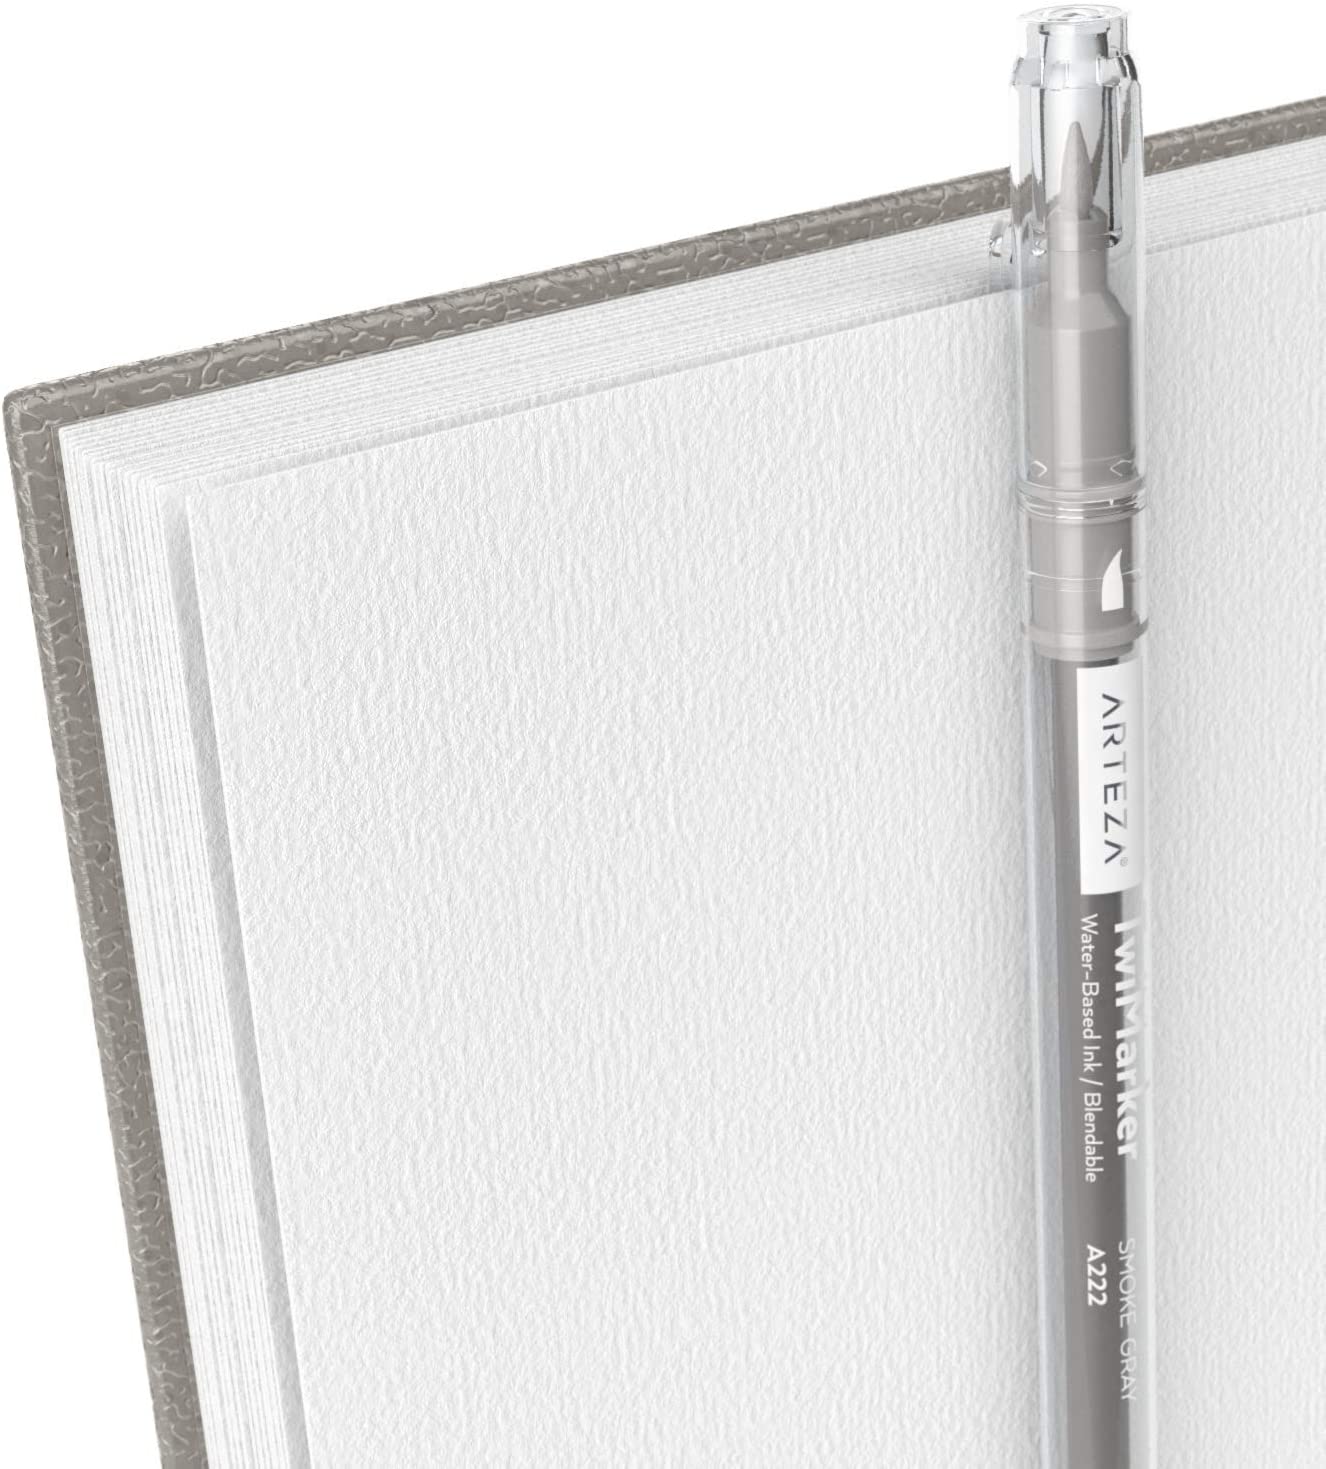 Watercolor Book, Spiral-Bound Hardcover, Gray, 9" x 12” - Pack of 2